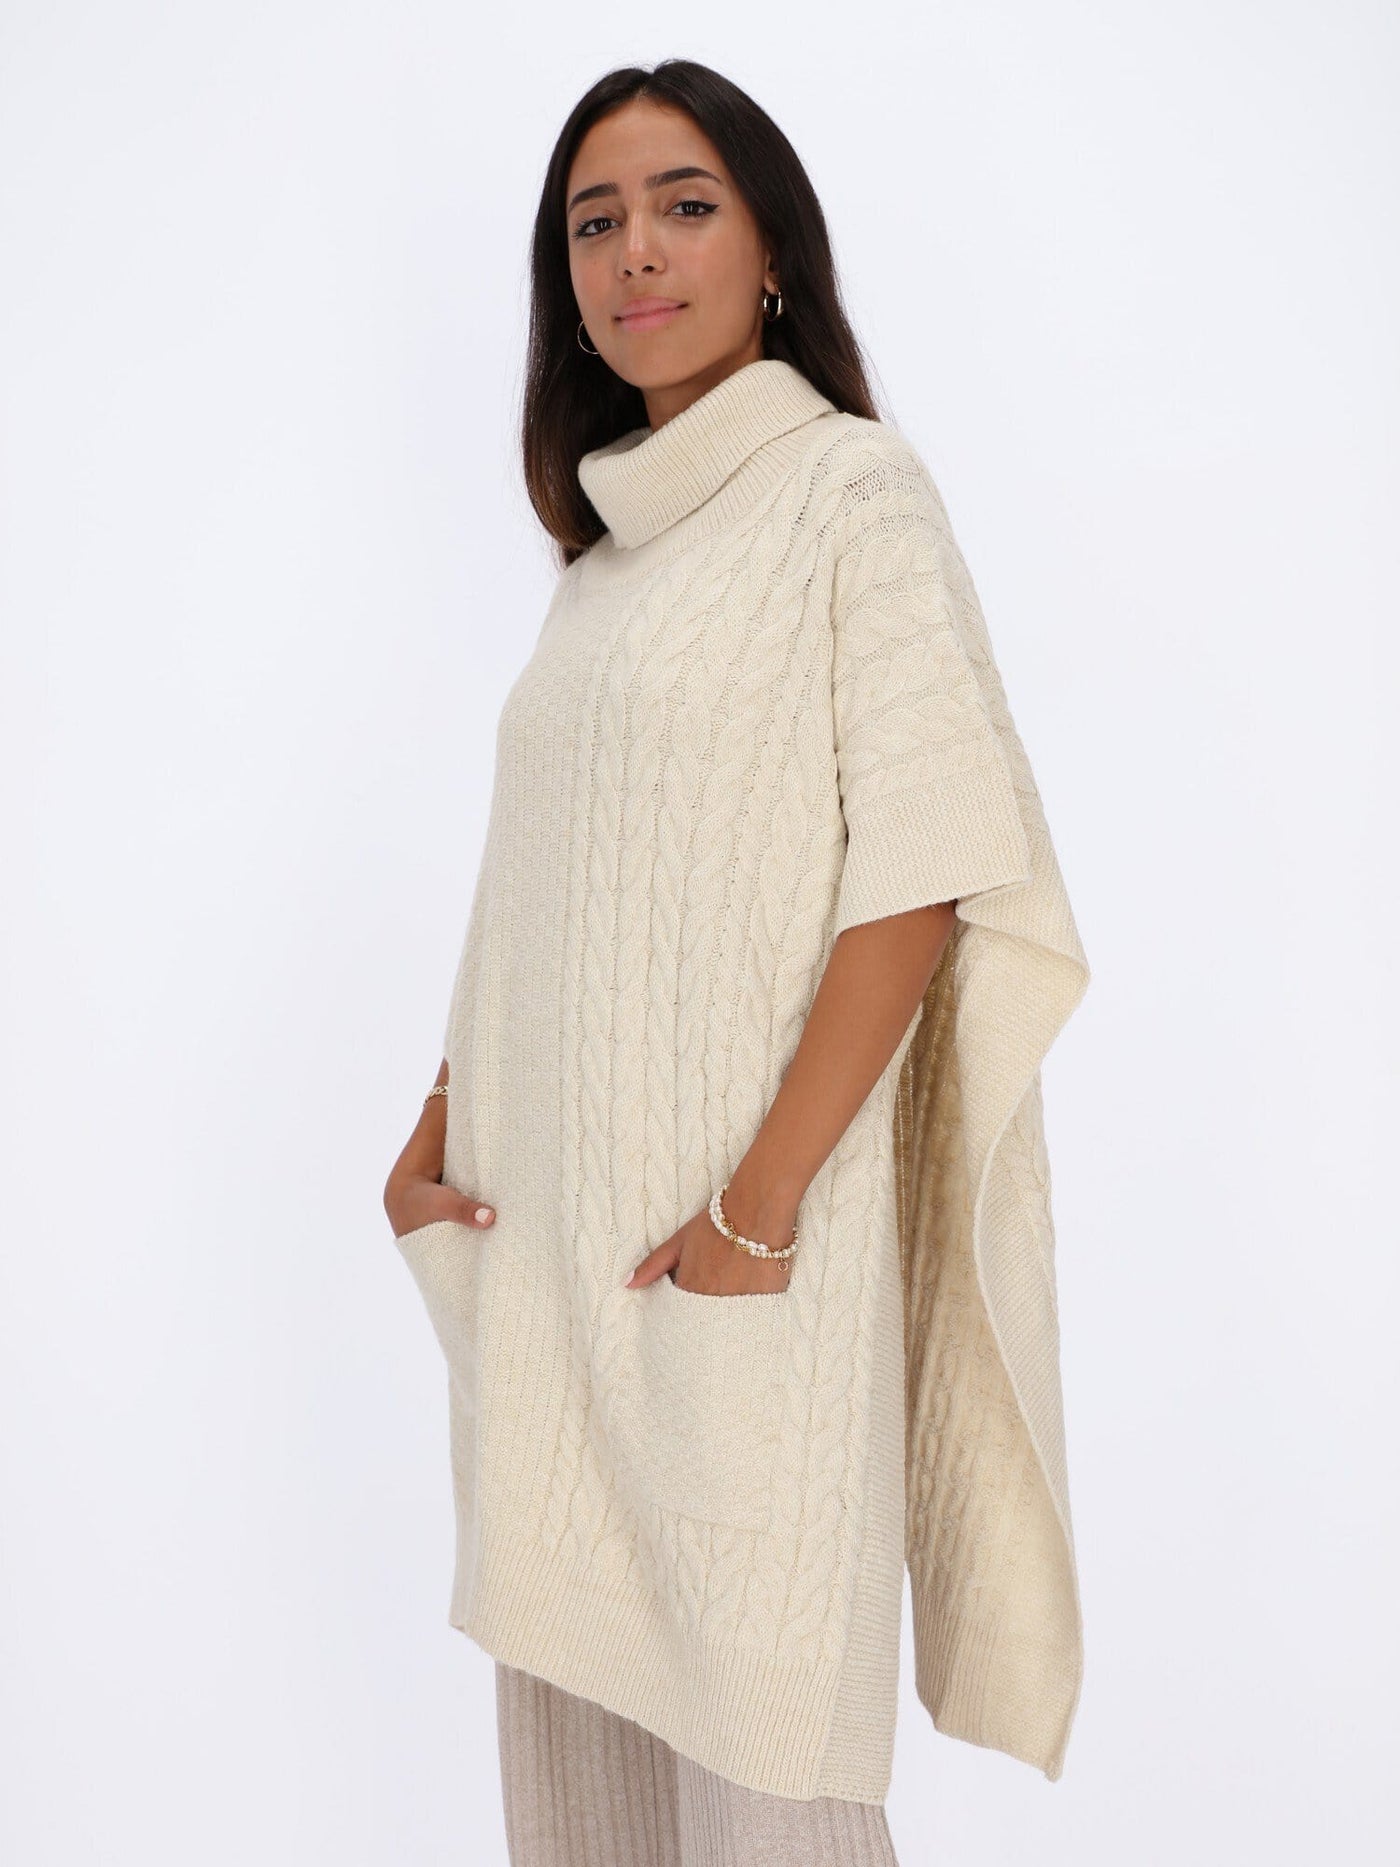 OR Knitwear Beige Chine / One Size Poncho Knitwear with Braided Texture